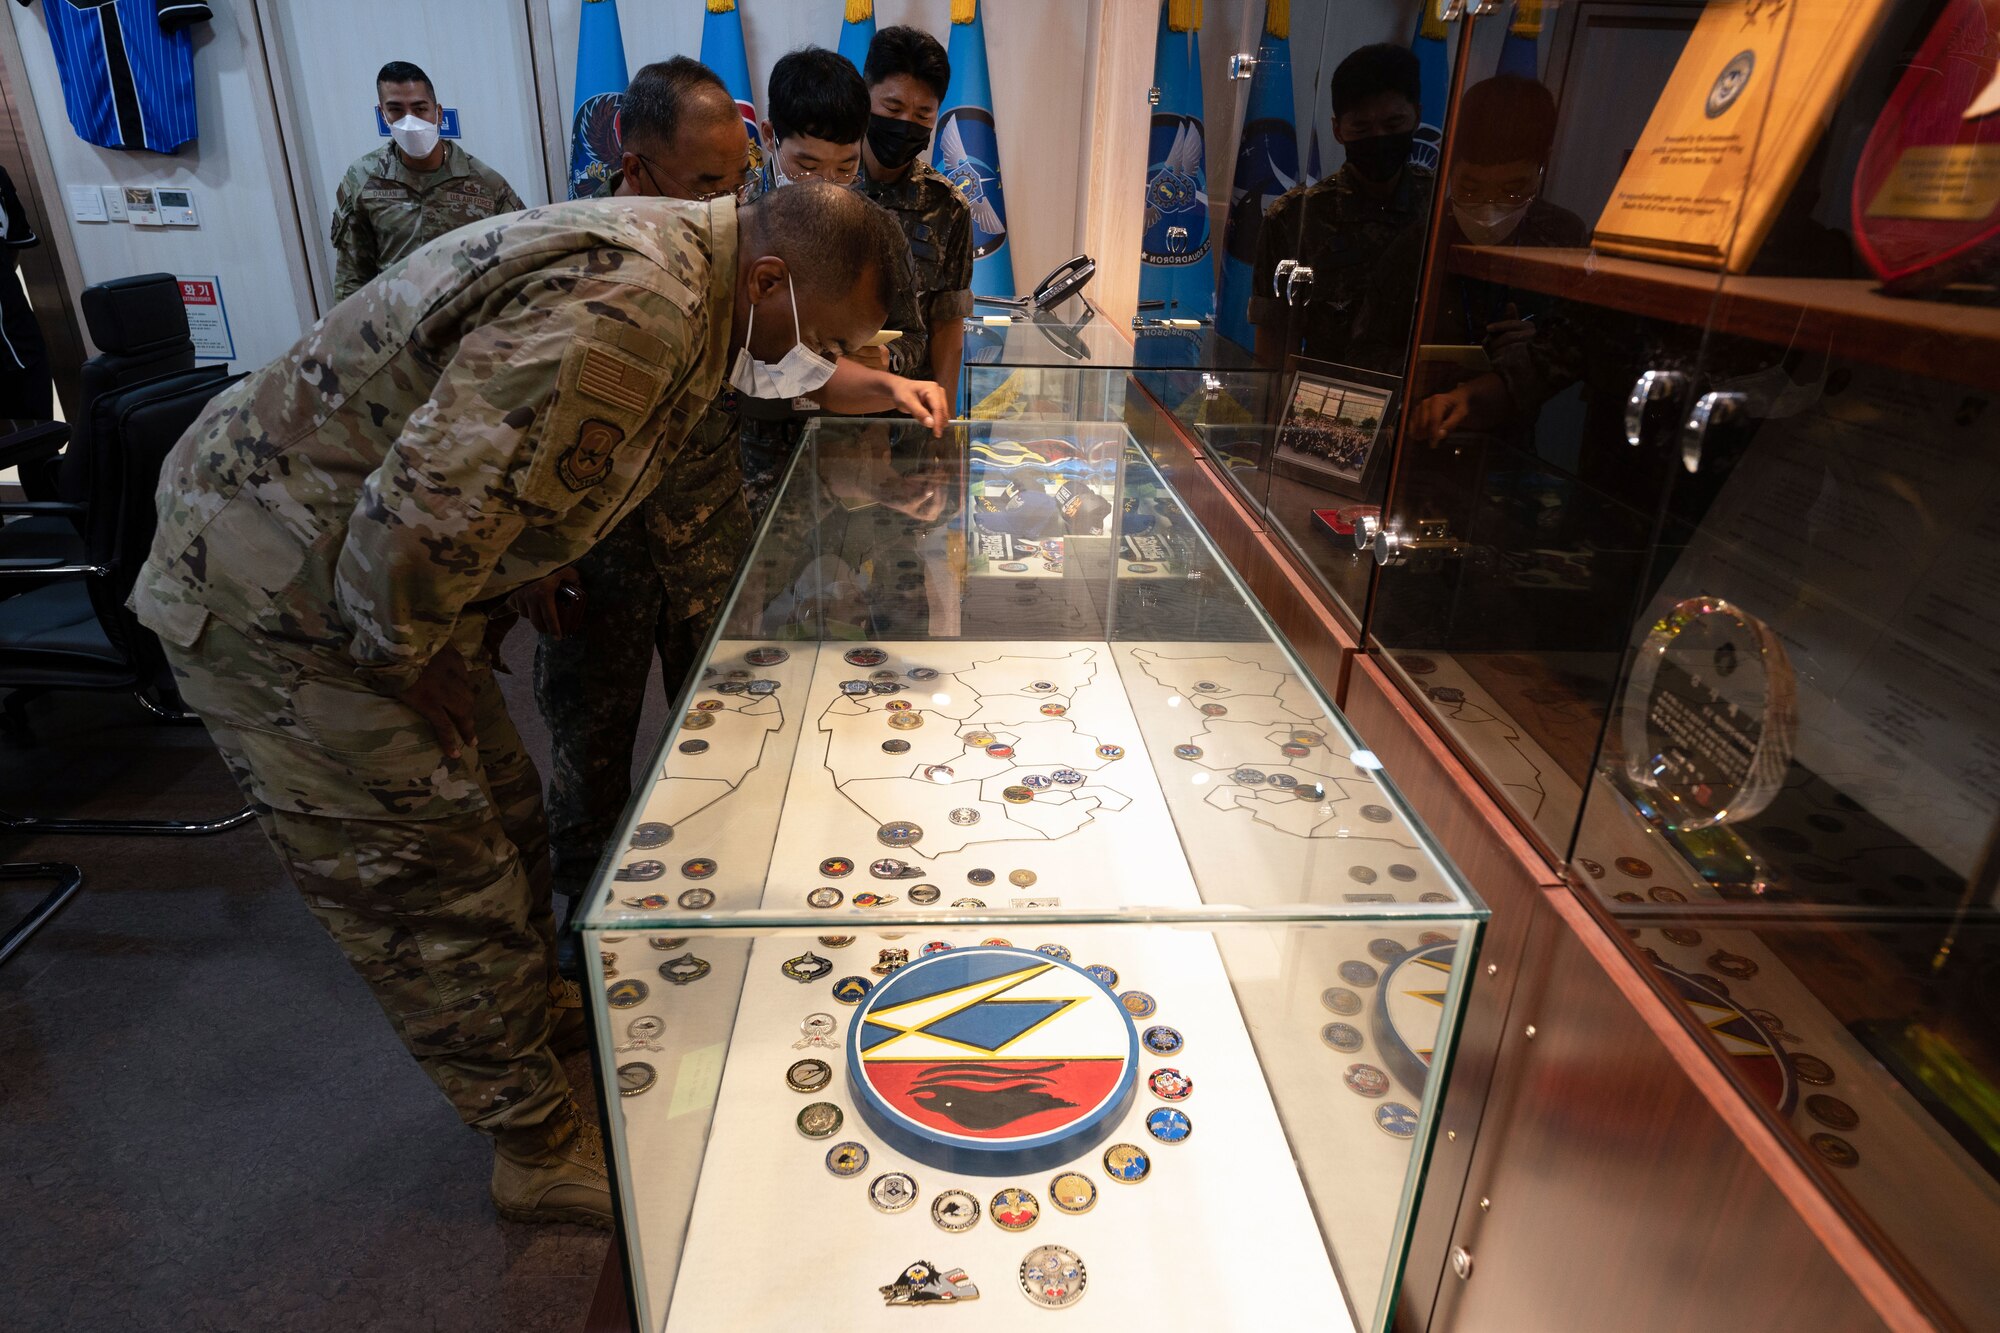 A military member looks into a glass case holding military memorabilia